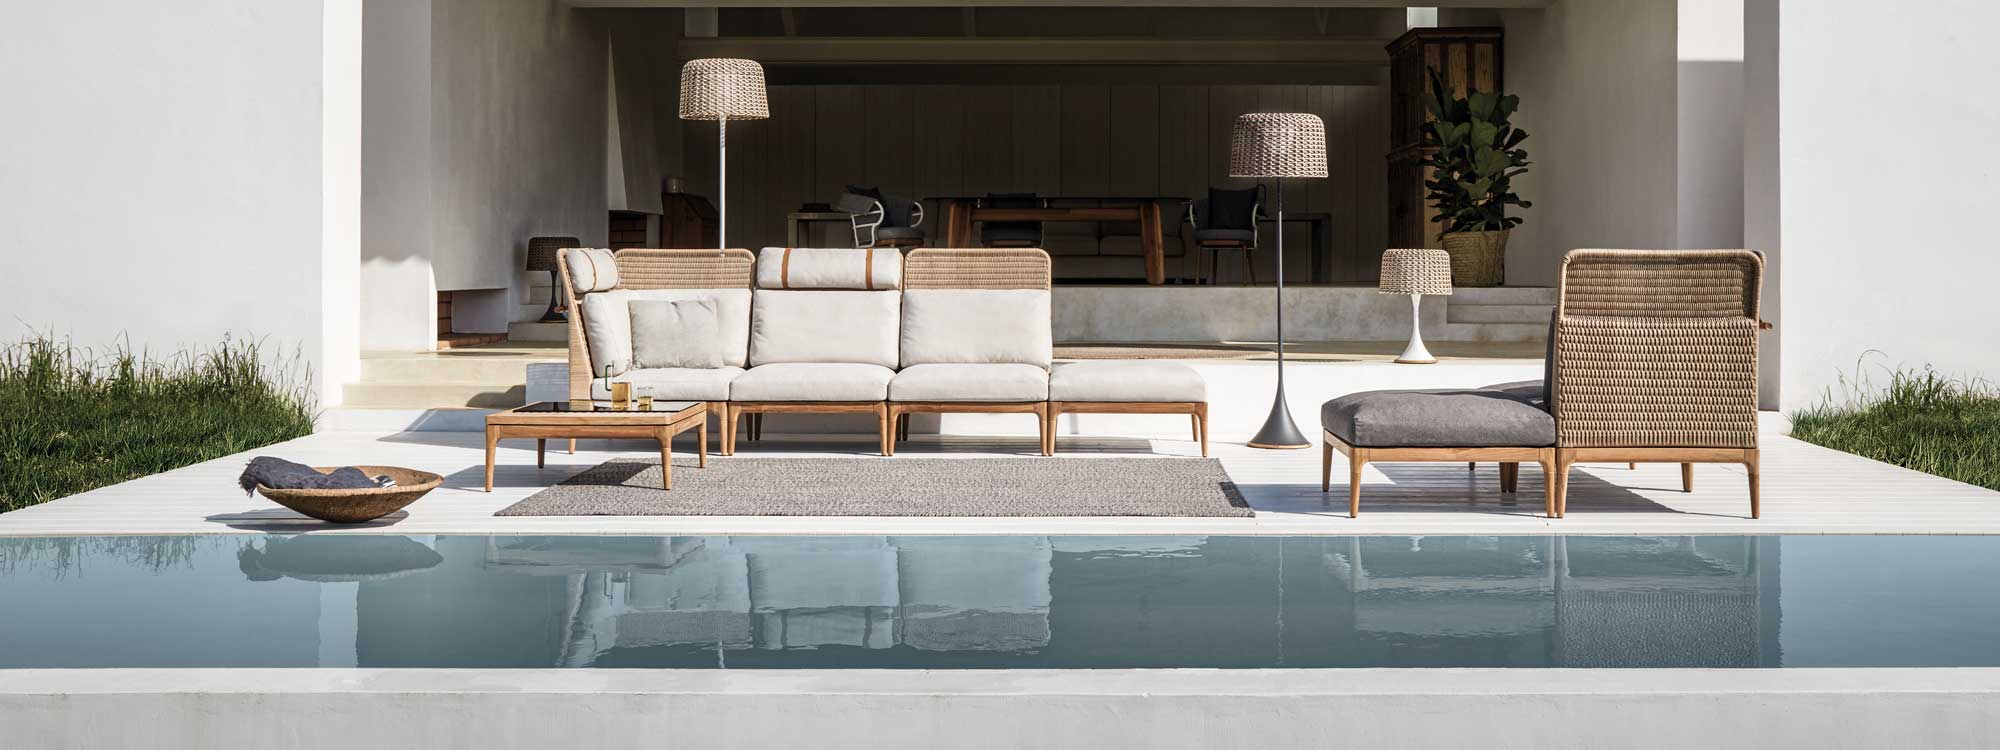 Image of Gloster Lima modern cane garden sofa with teak base , together with Mesh outdoor floor lamps on a minimalist poolside